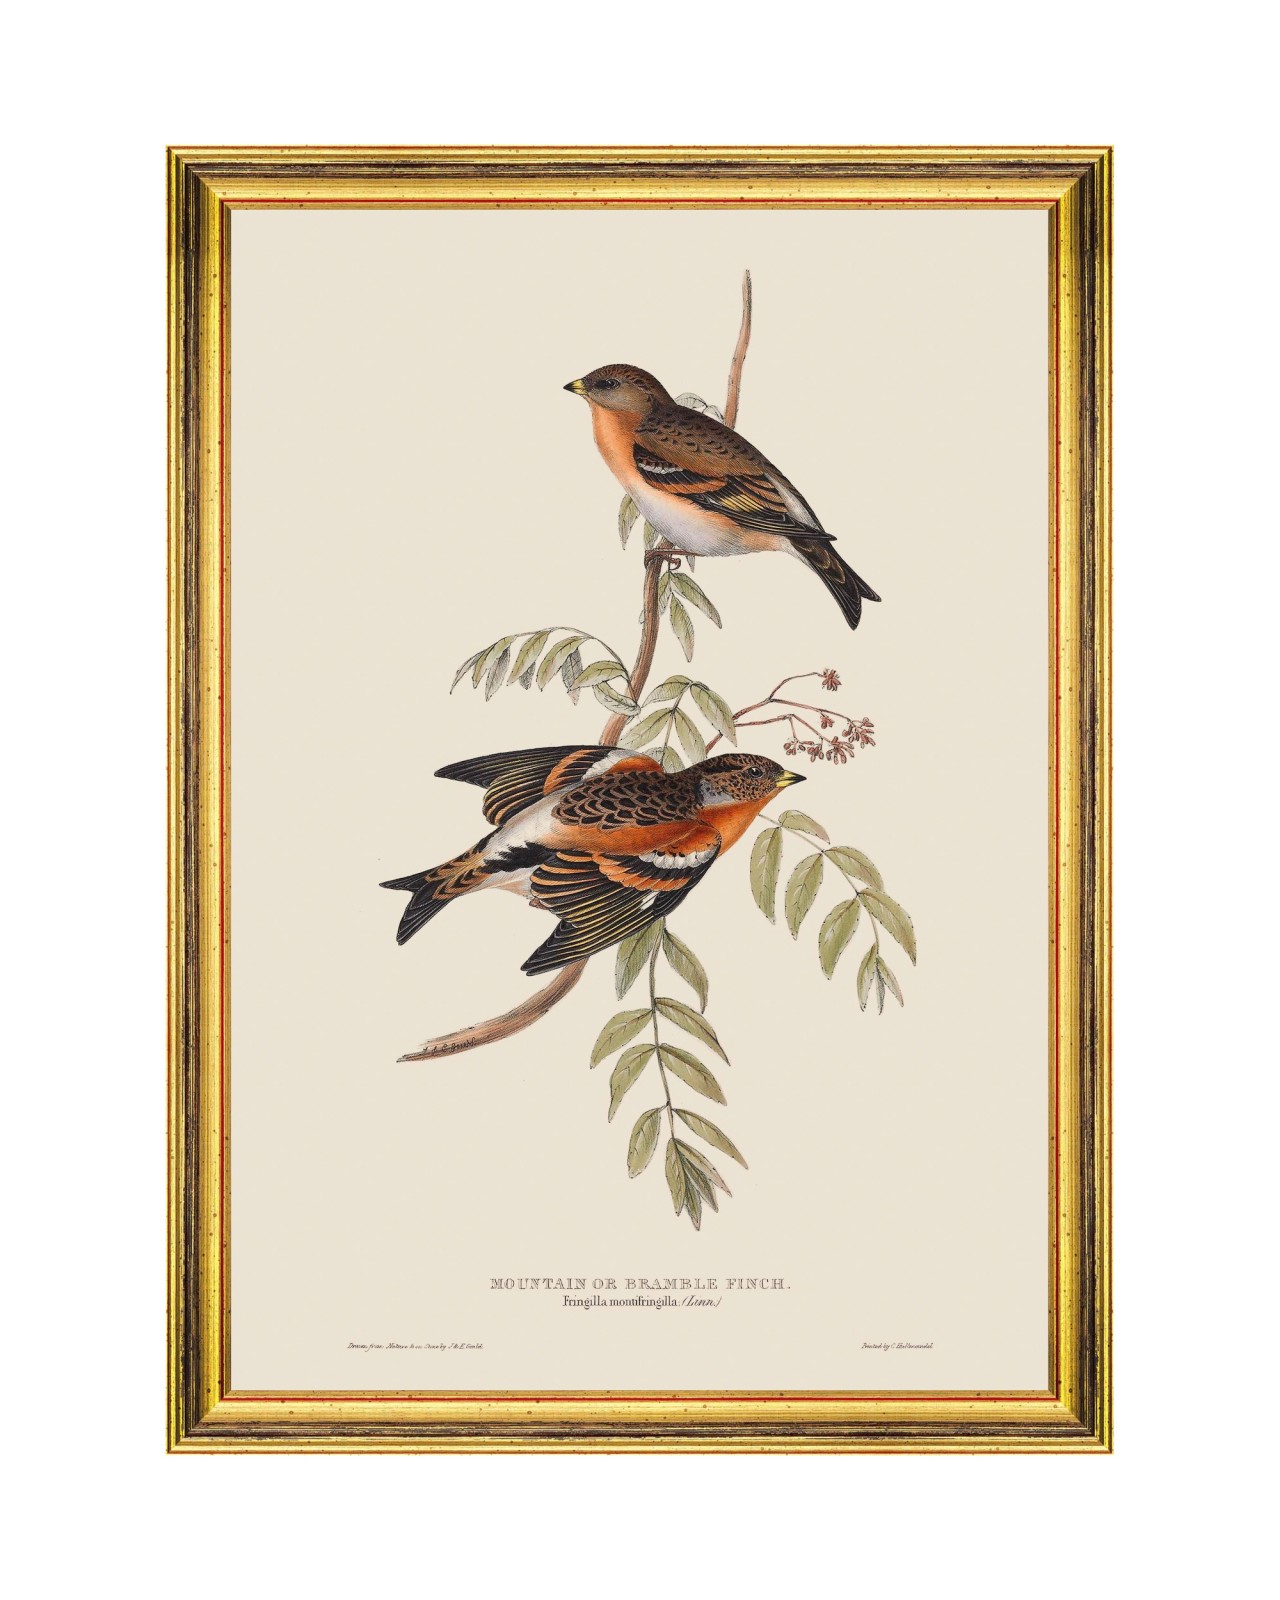 images/productimages/small/mountain-of-bramble-finch-framed-art-35x50cm-fa13235.jpg